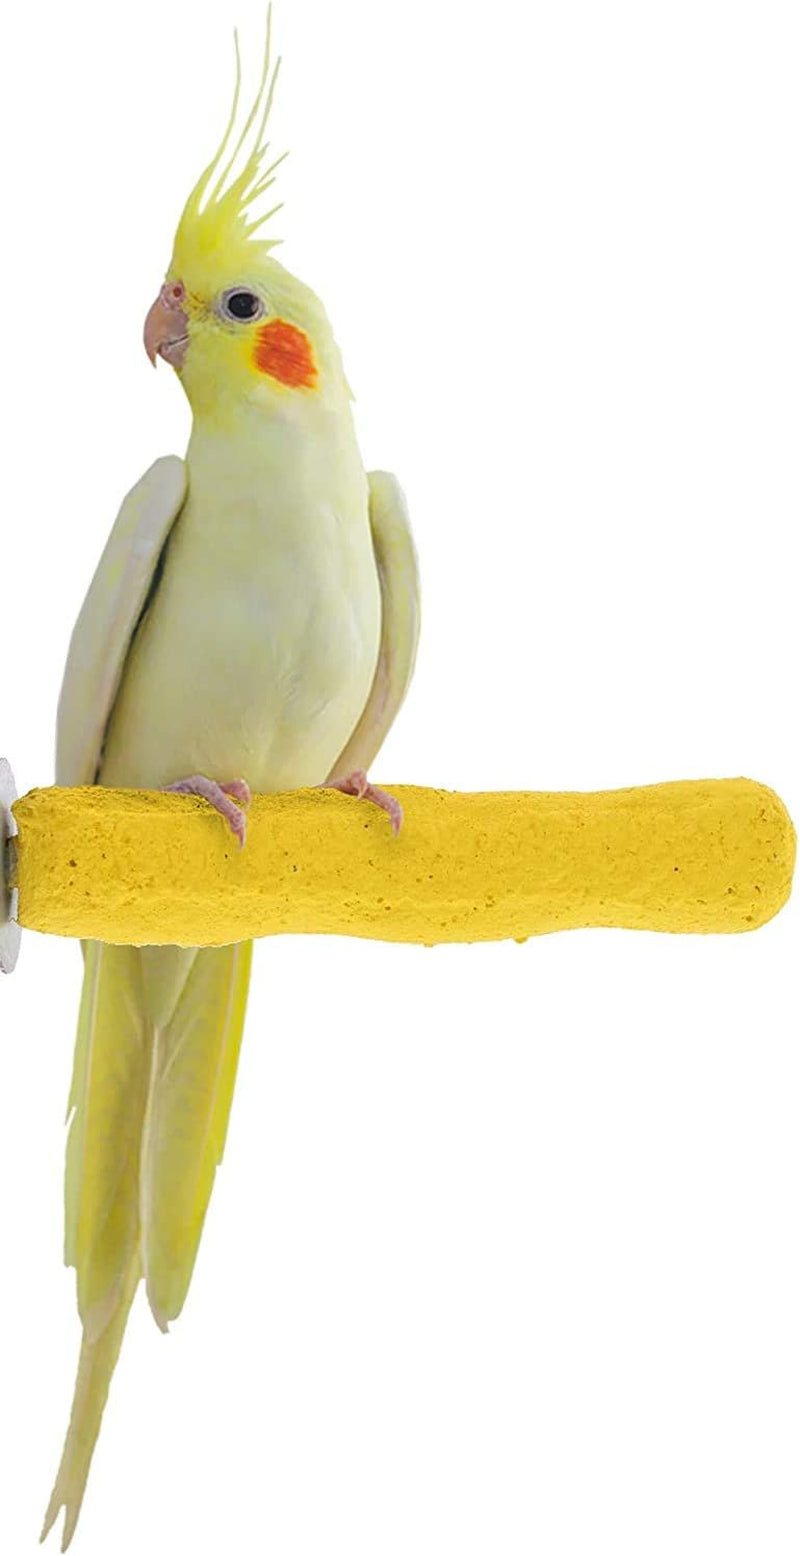 Sweet Feet and Beak Comfort Grip Safety Perch for Bird Cages - Patented Pumice Perch for Birds to Keep Nails and Beaks in Top Condition - Safe Easy to Install Bird Cage Accessories - M 8.5" Animals & Pet Supplies > Pet Supplies > Bird Supplies Sweet Feet and Beak Yellow X-Small 4.5" 